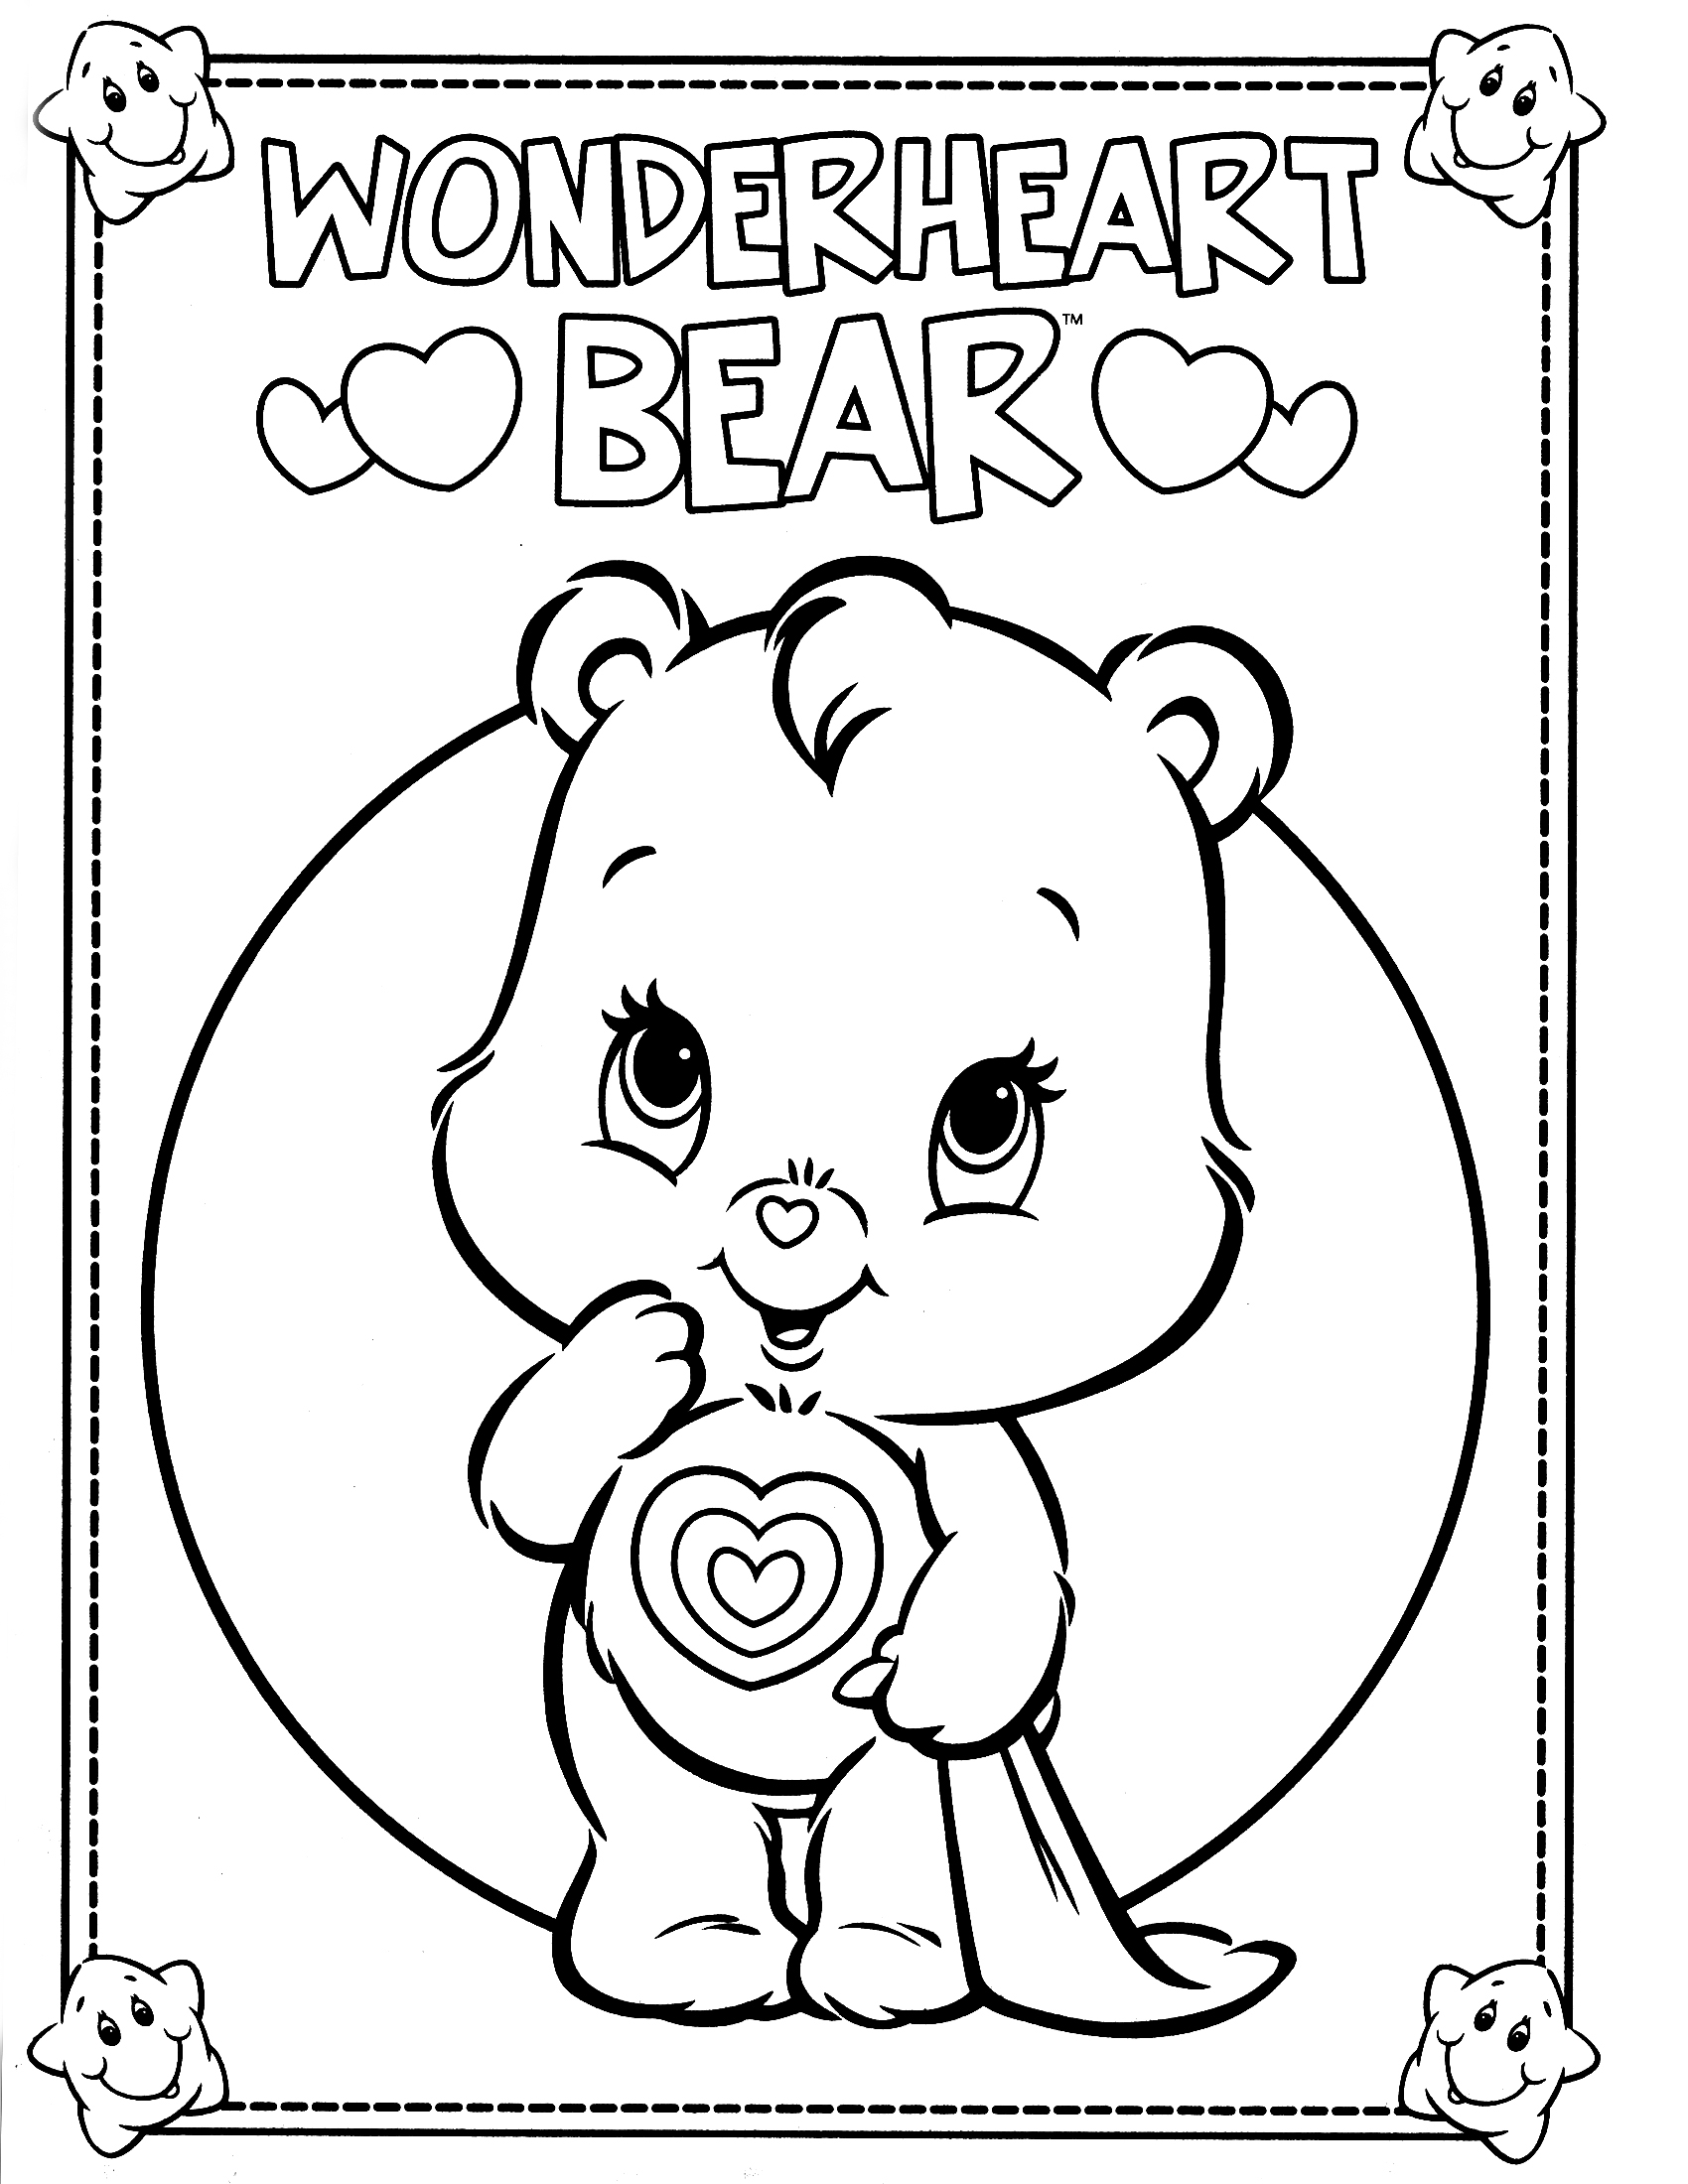 Free Care Bear Coloring Pages Free Care Bear Coloring Pages At Getdrawings Free For Personal